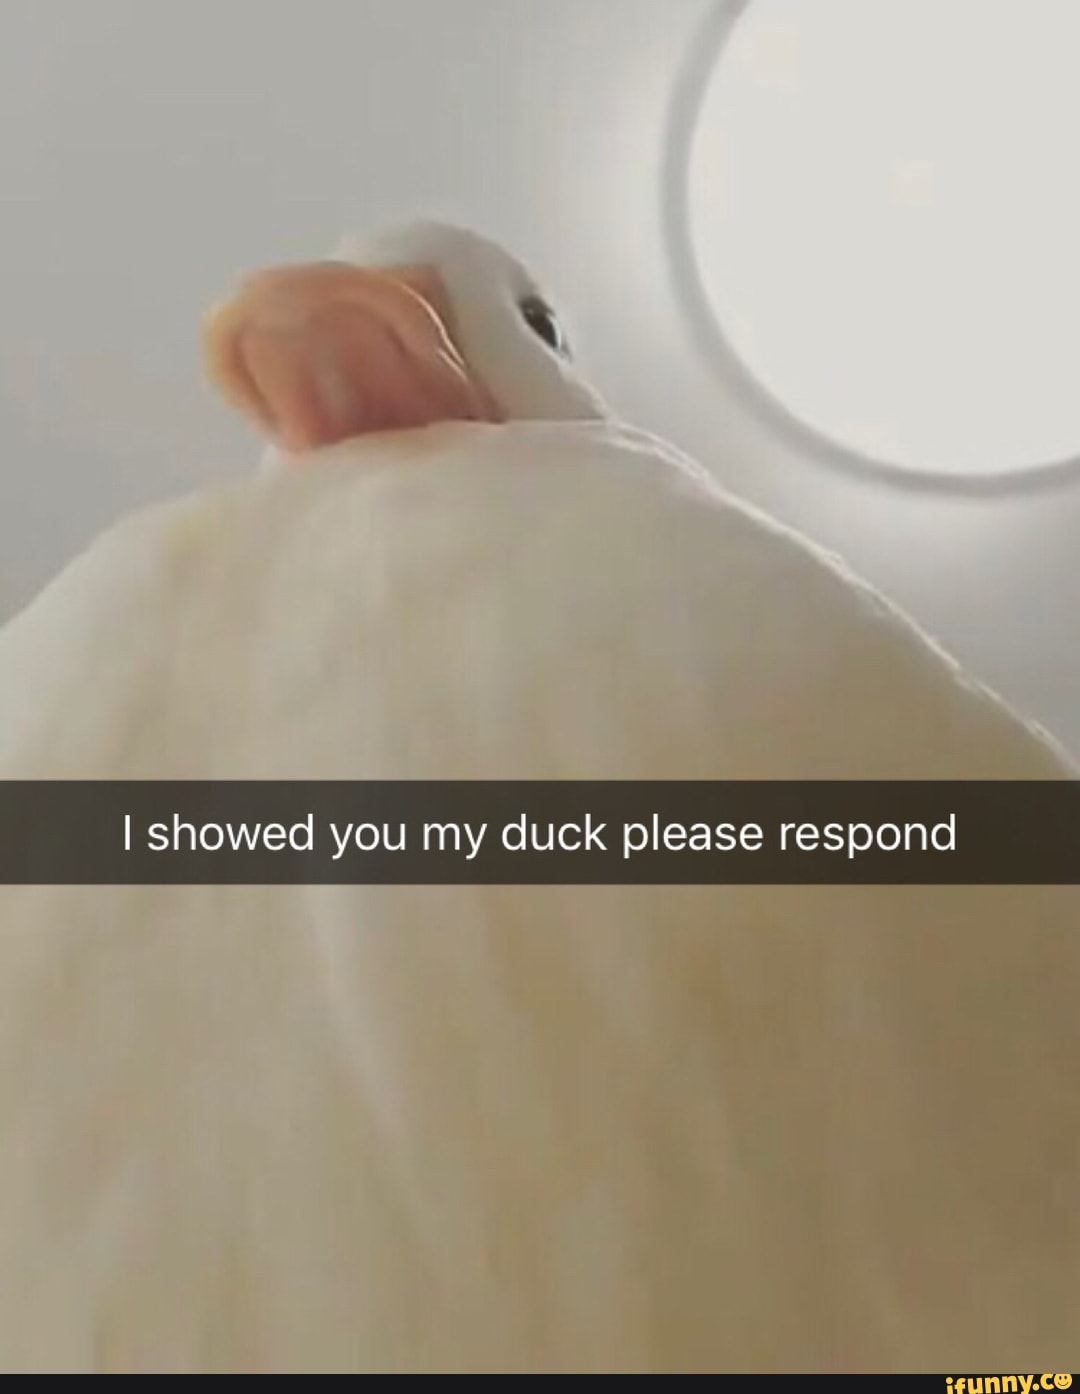 I showed you my duck please respond.